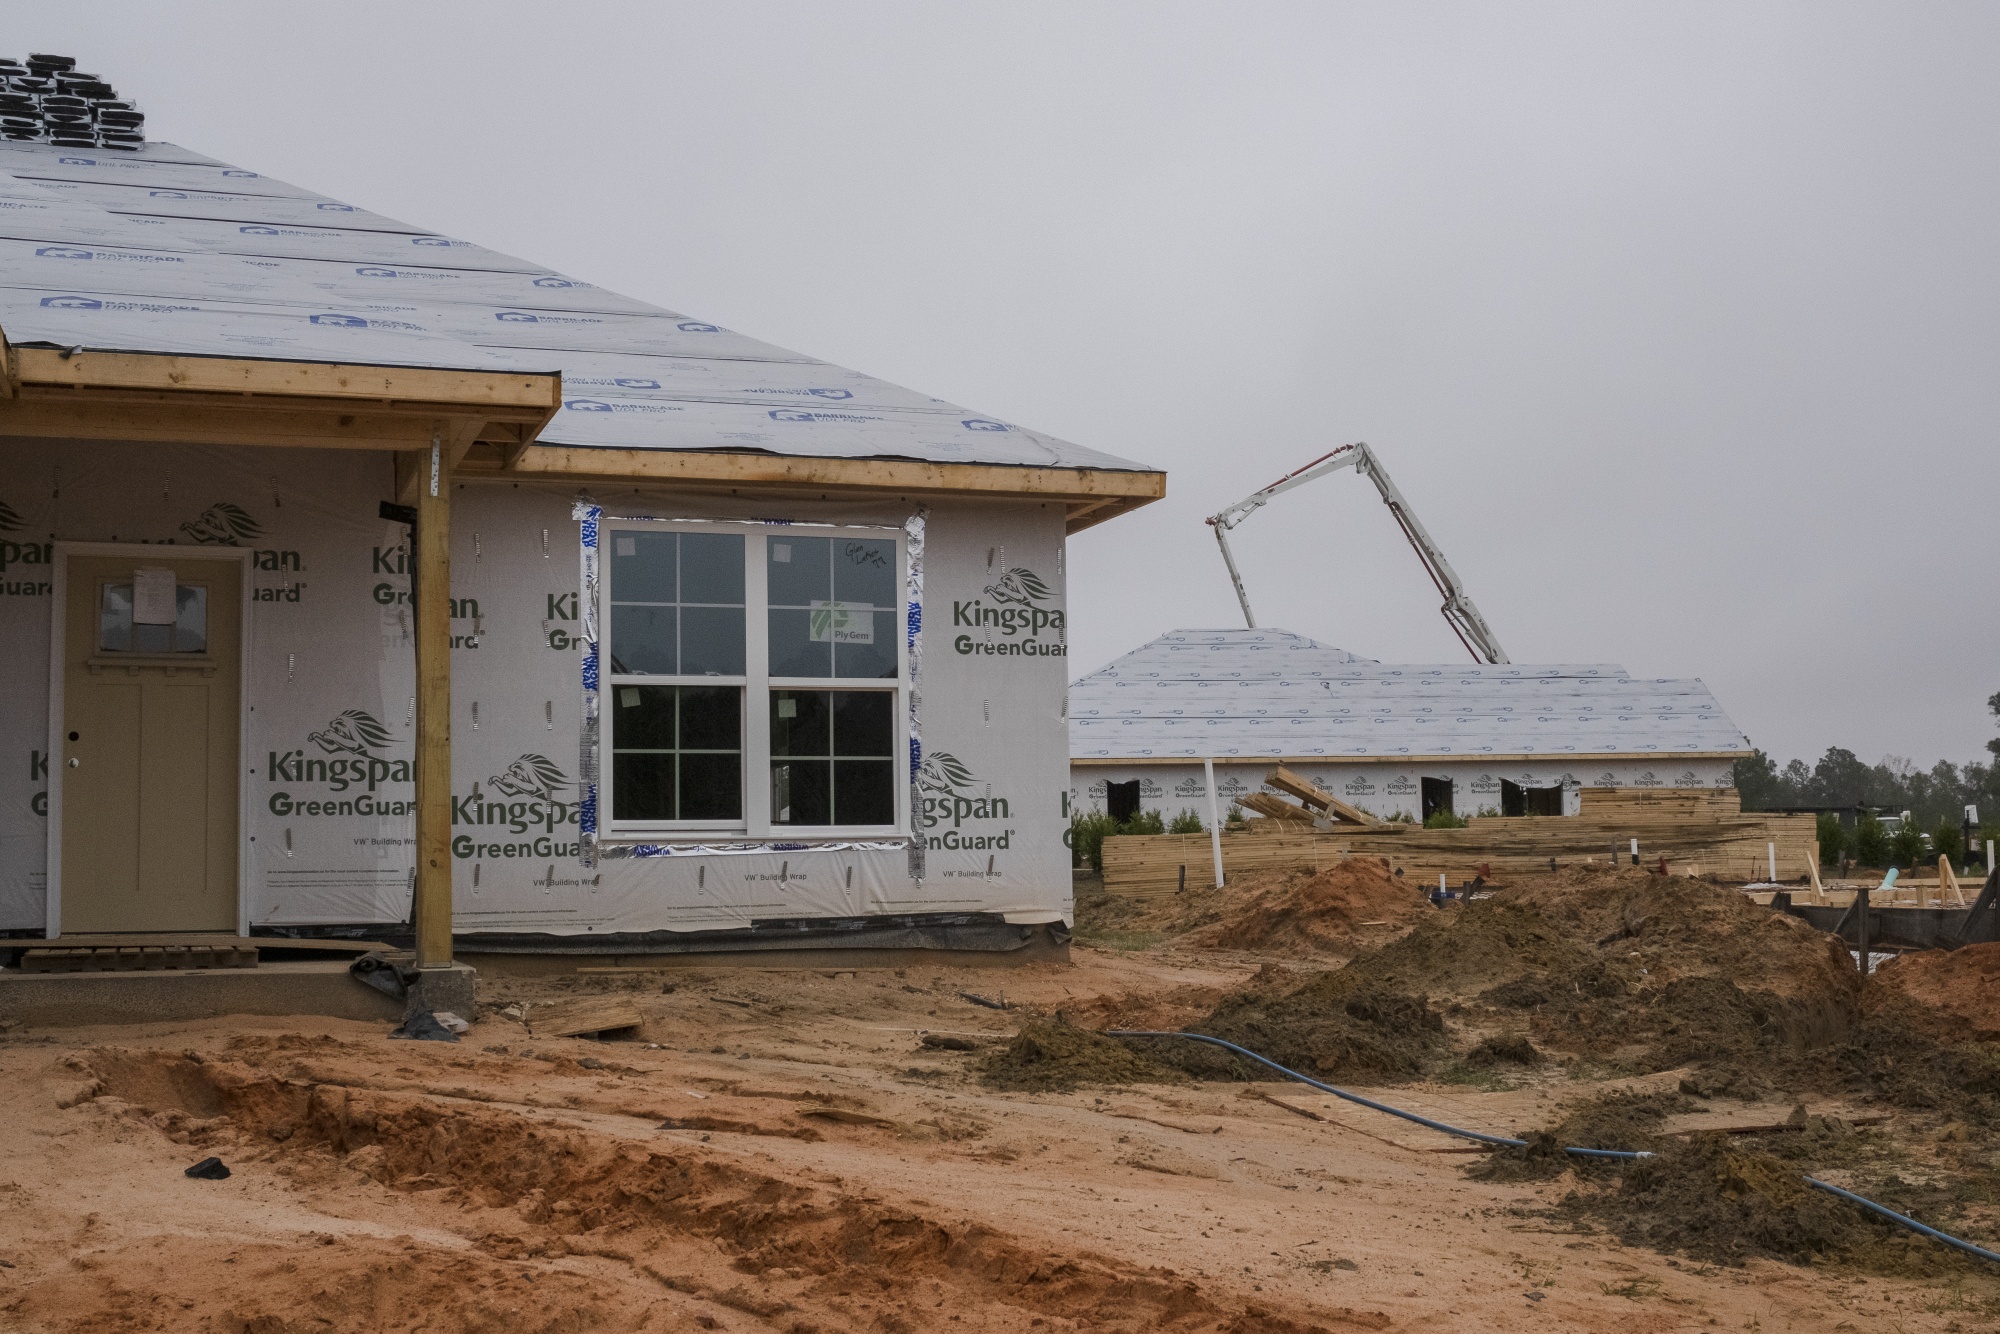 New Home Construction As US Housing Figures Slide